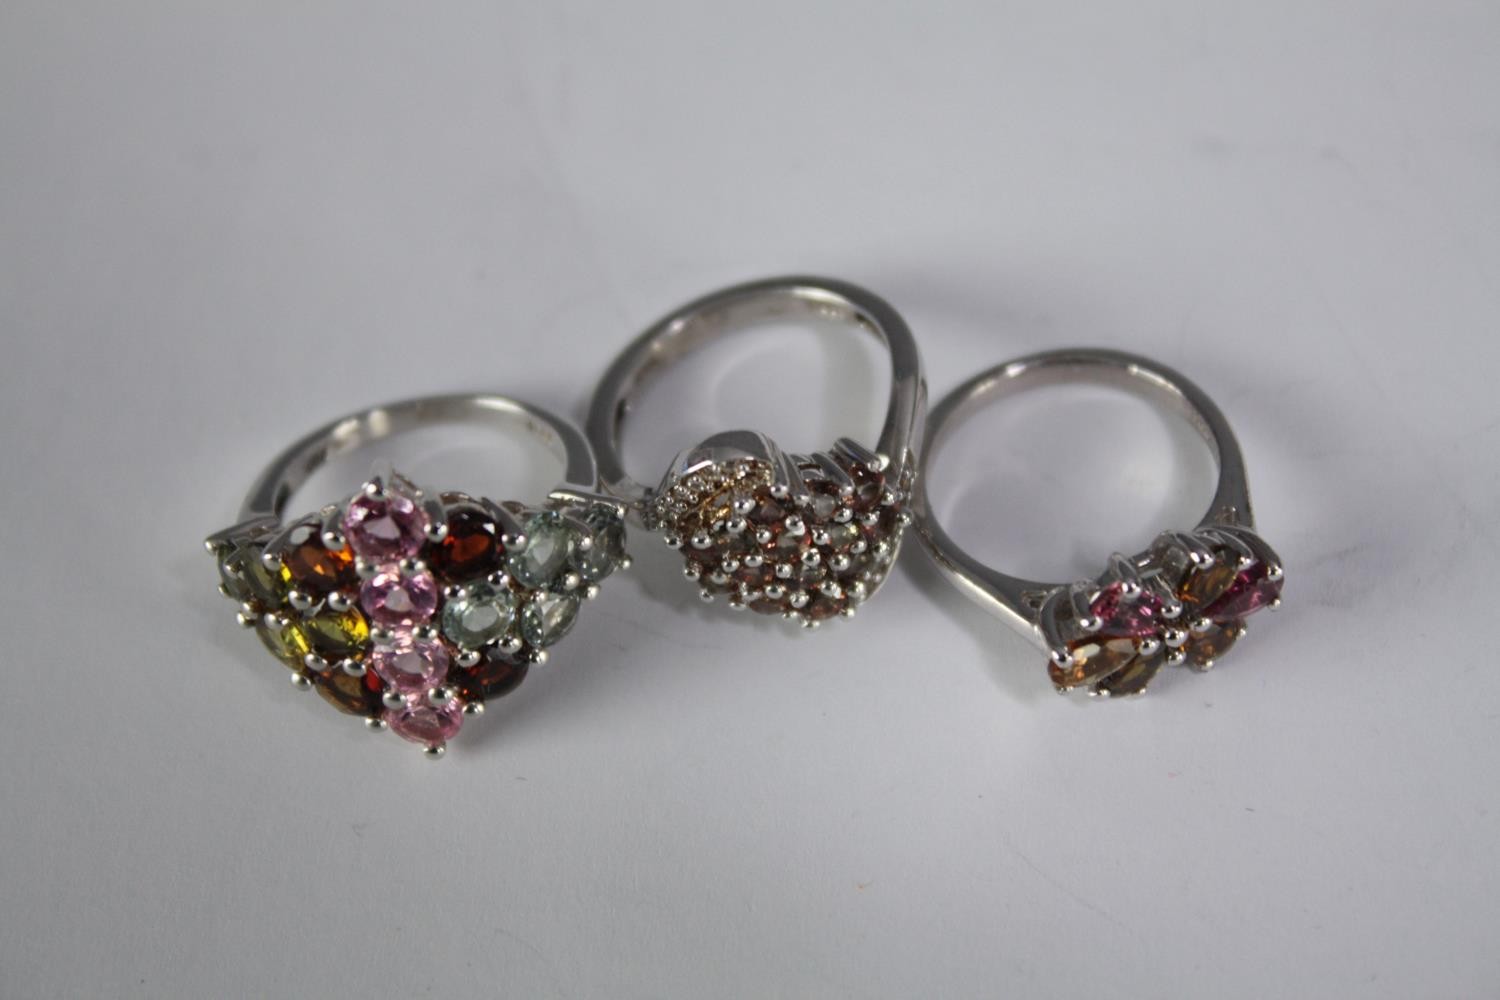 A collection of ten silver gem-set rings of various designs. Set with peridot, Tourmaline, - Image 3 of 5